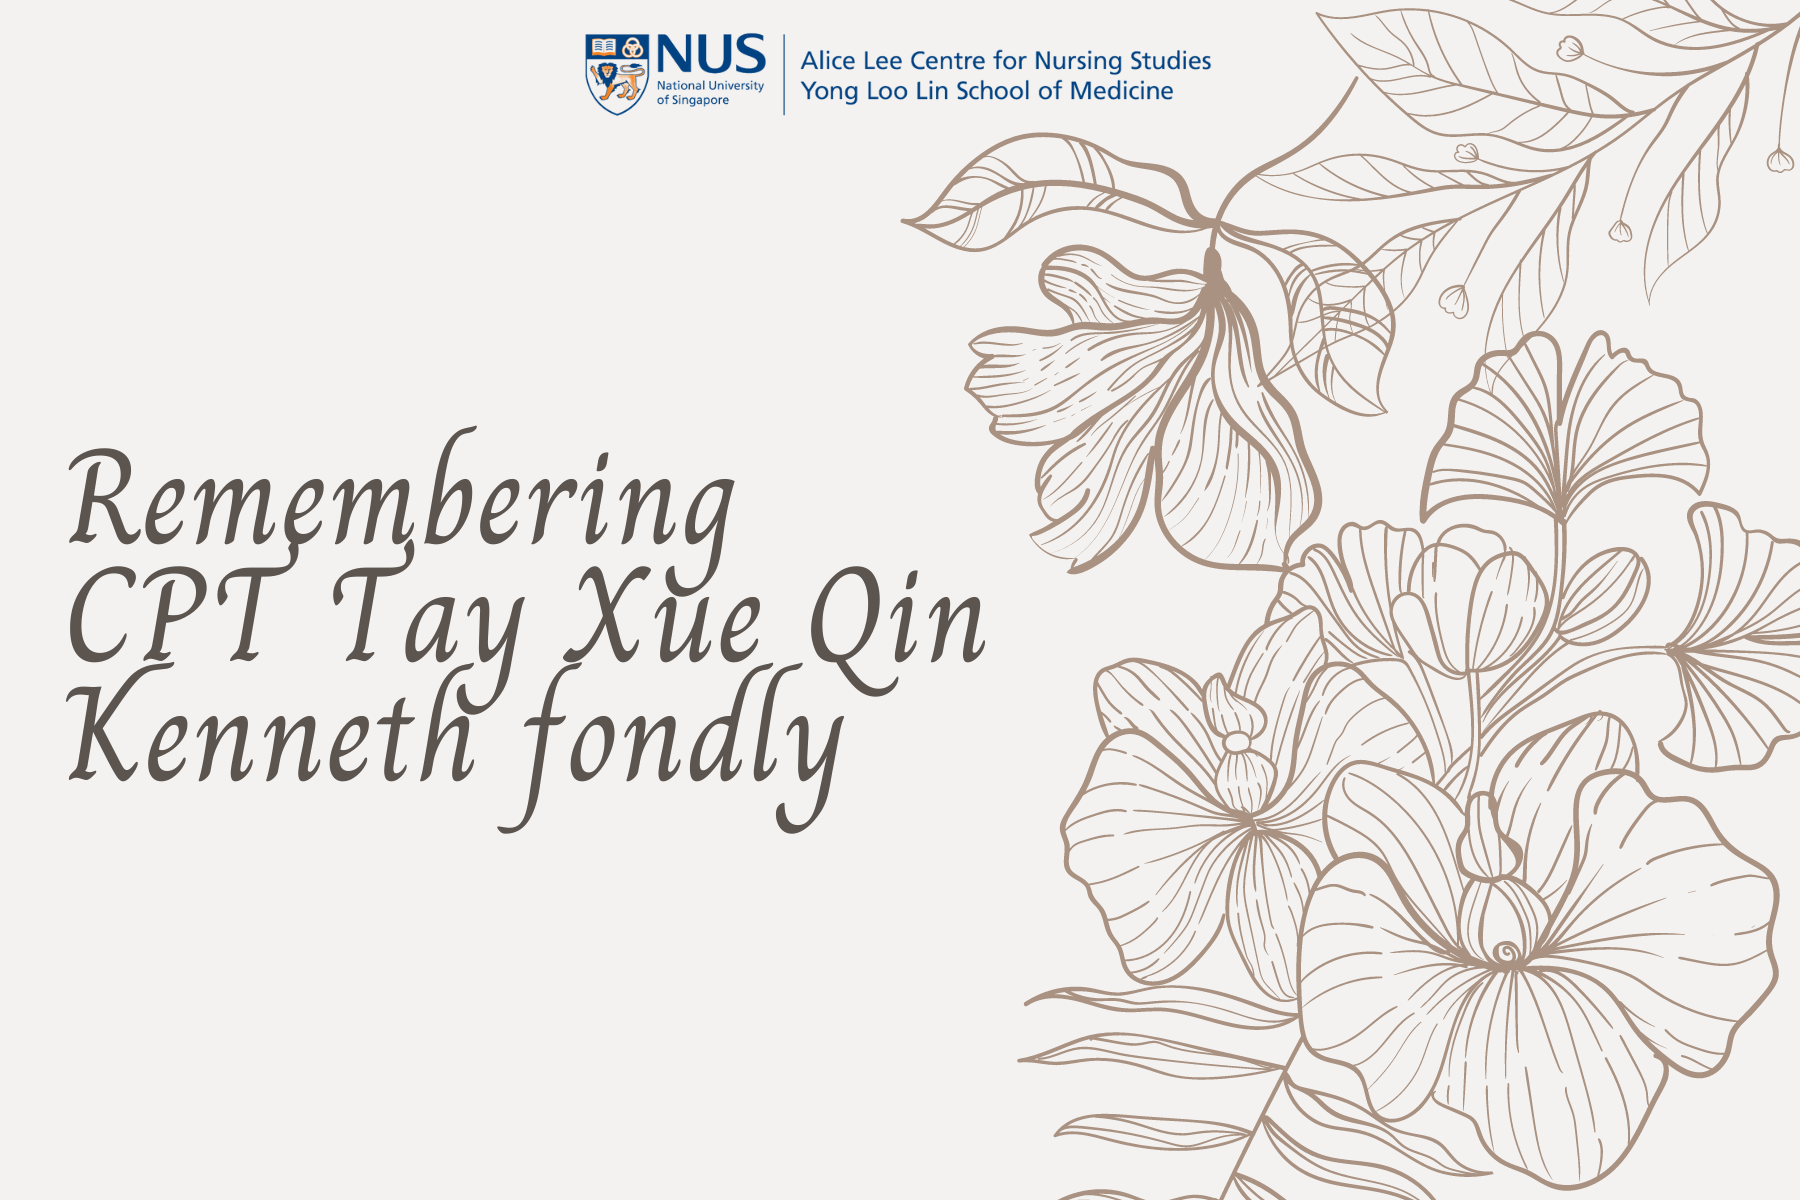 Remembering Captain (CPT) Tay Xue Qin Kenneth fondly